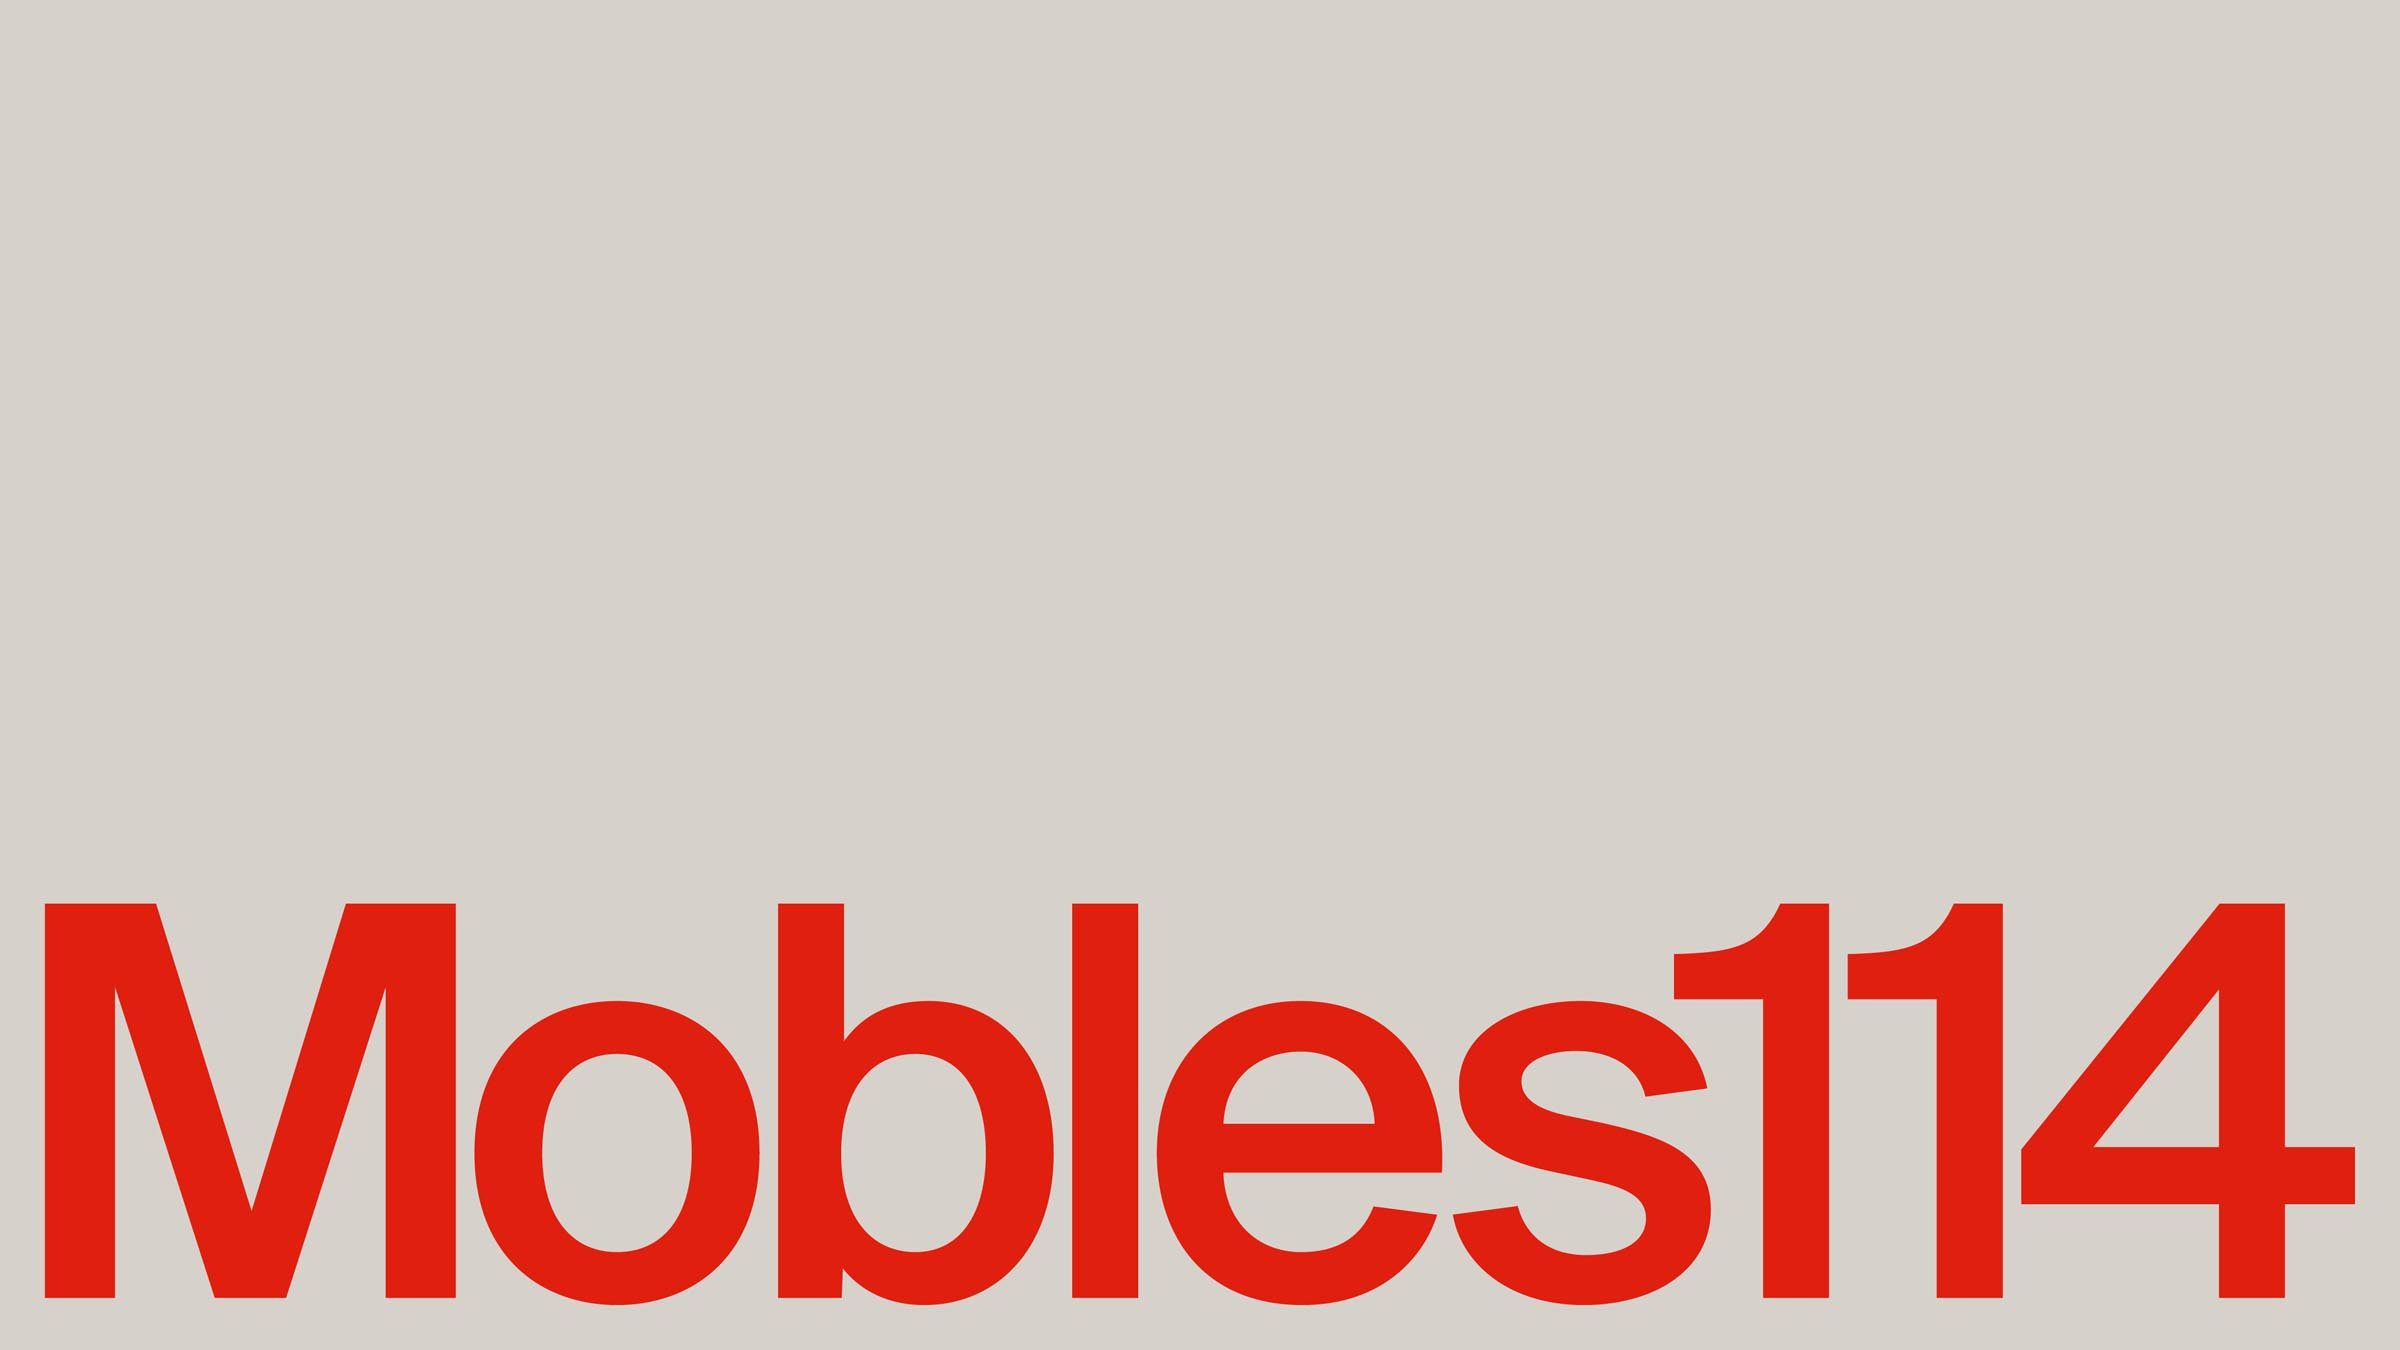 A contemporary identity for Mobles114